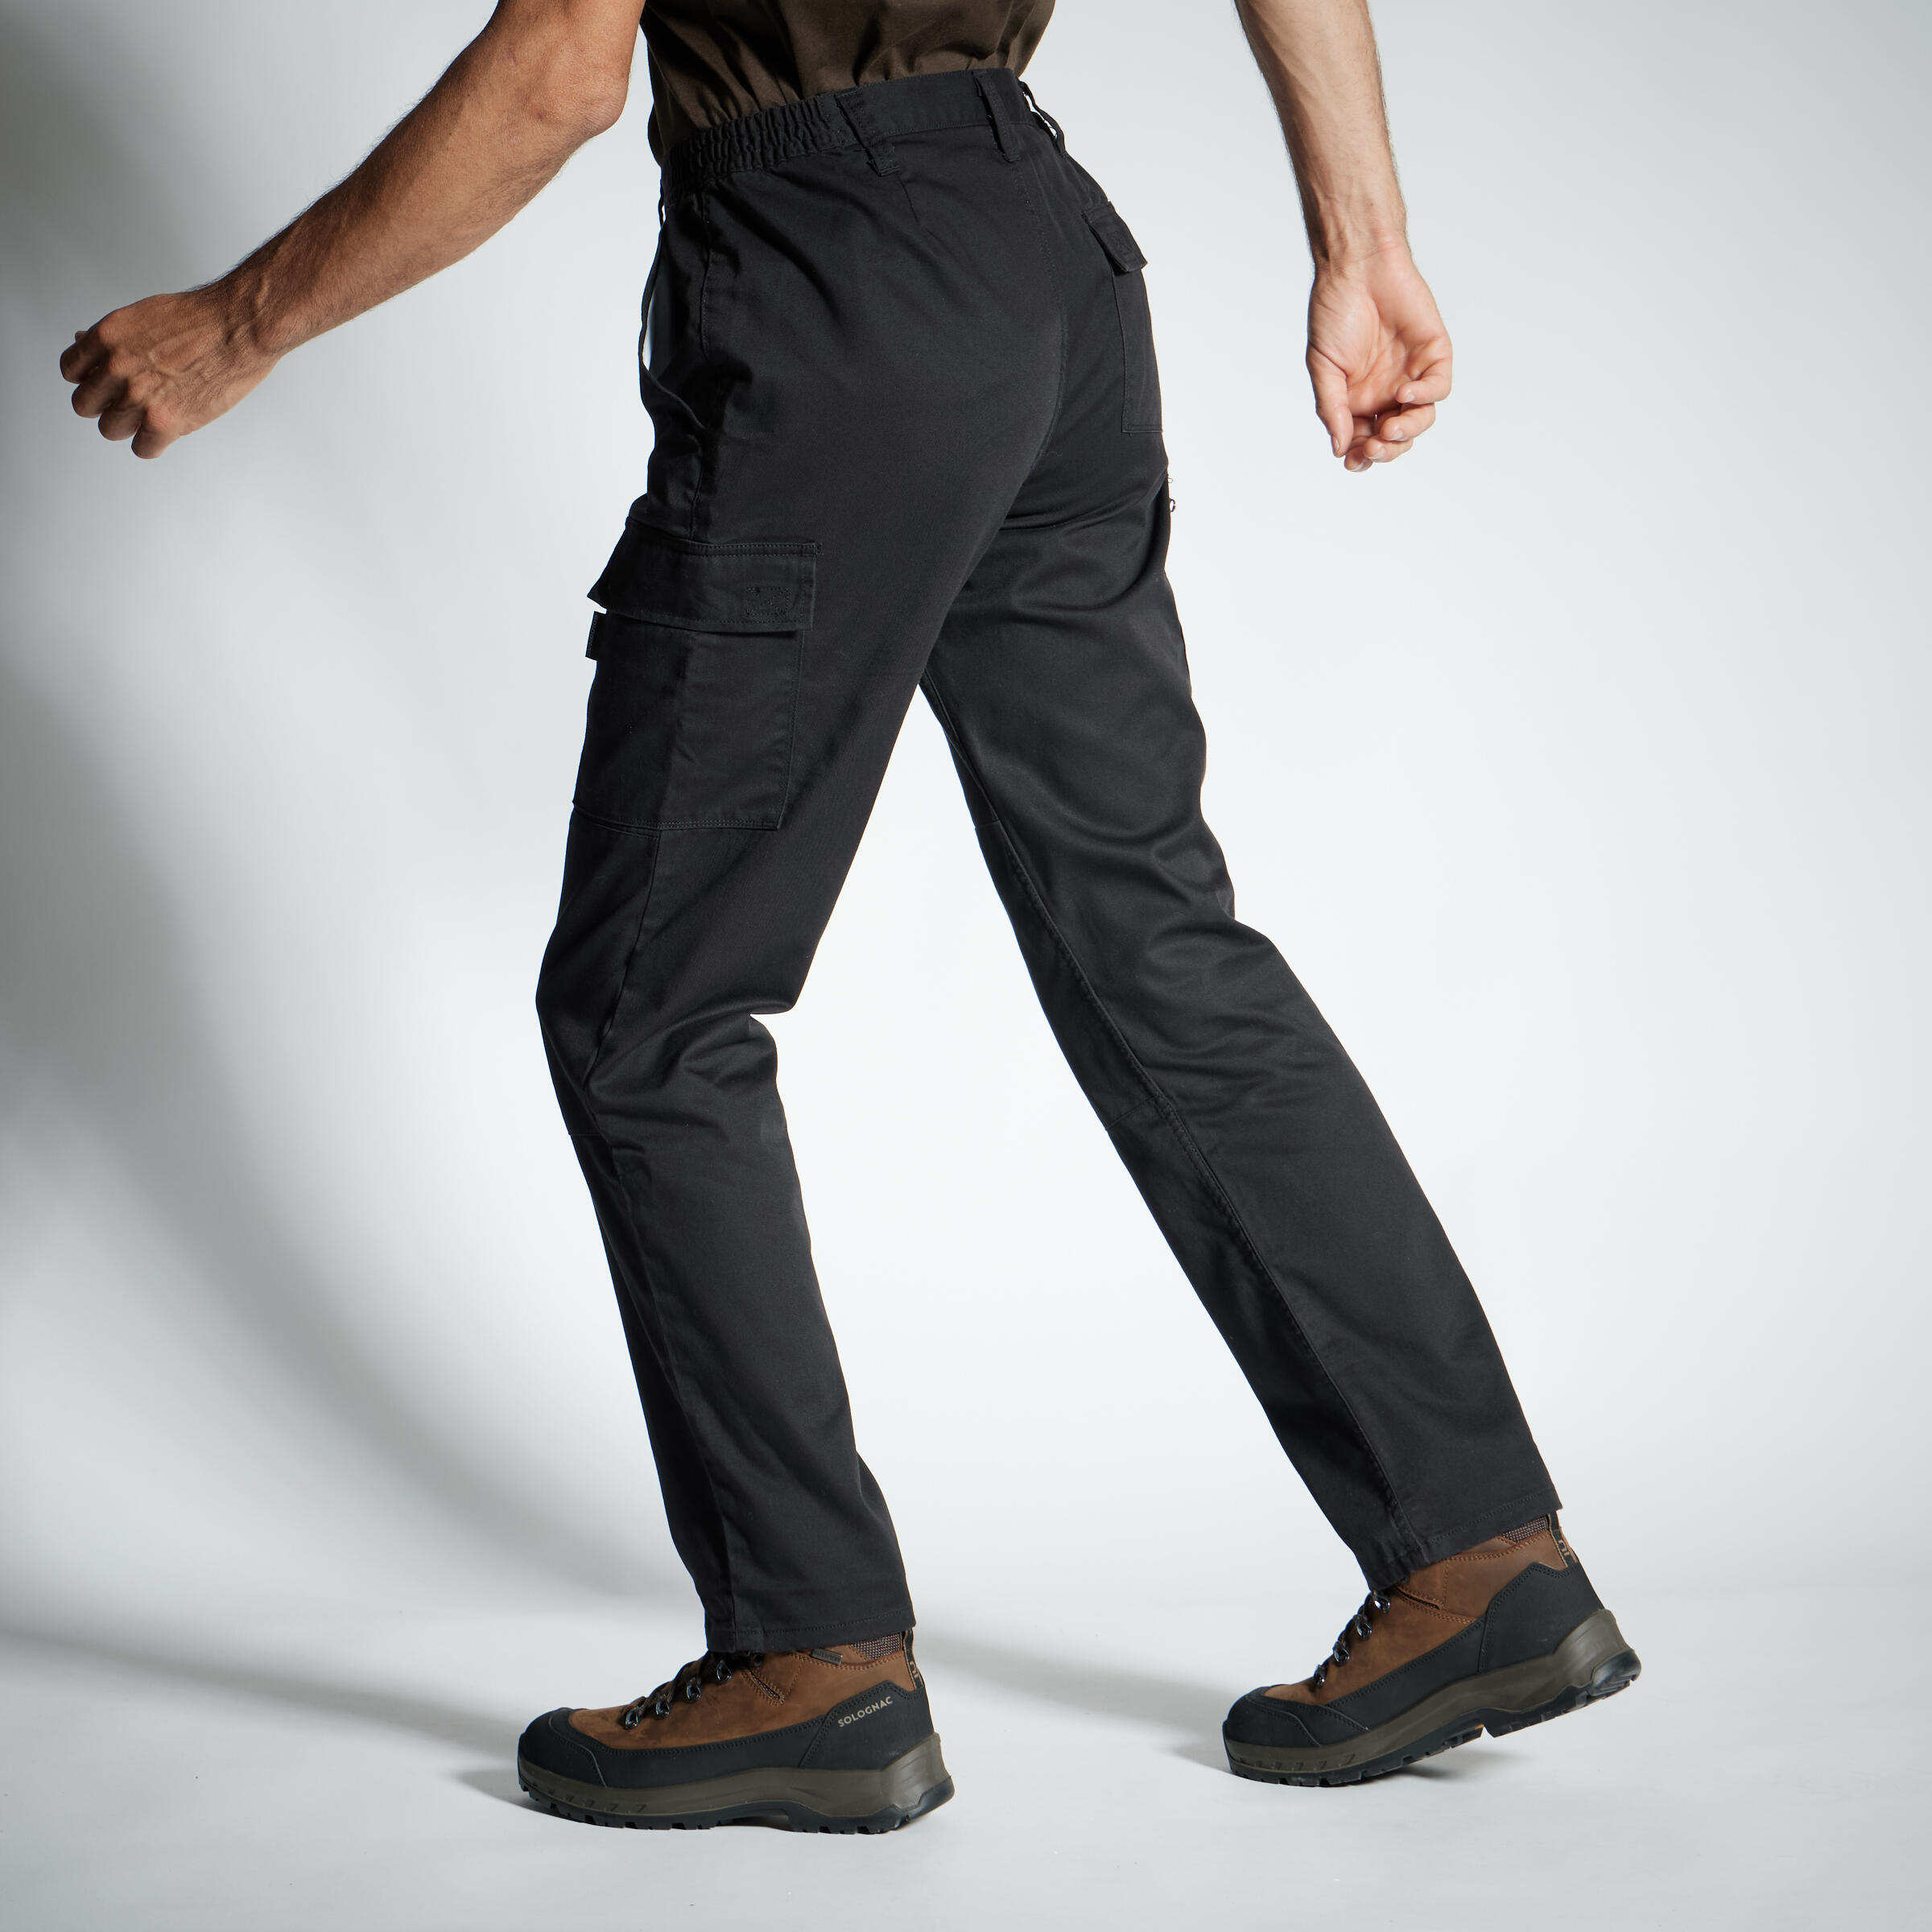 SOLOGNAC Trousers Steppe 300 - Bicolour : Amazon.in: Clothing & Accessories